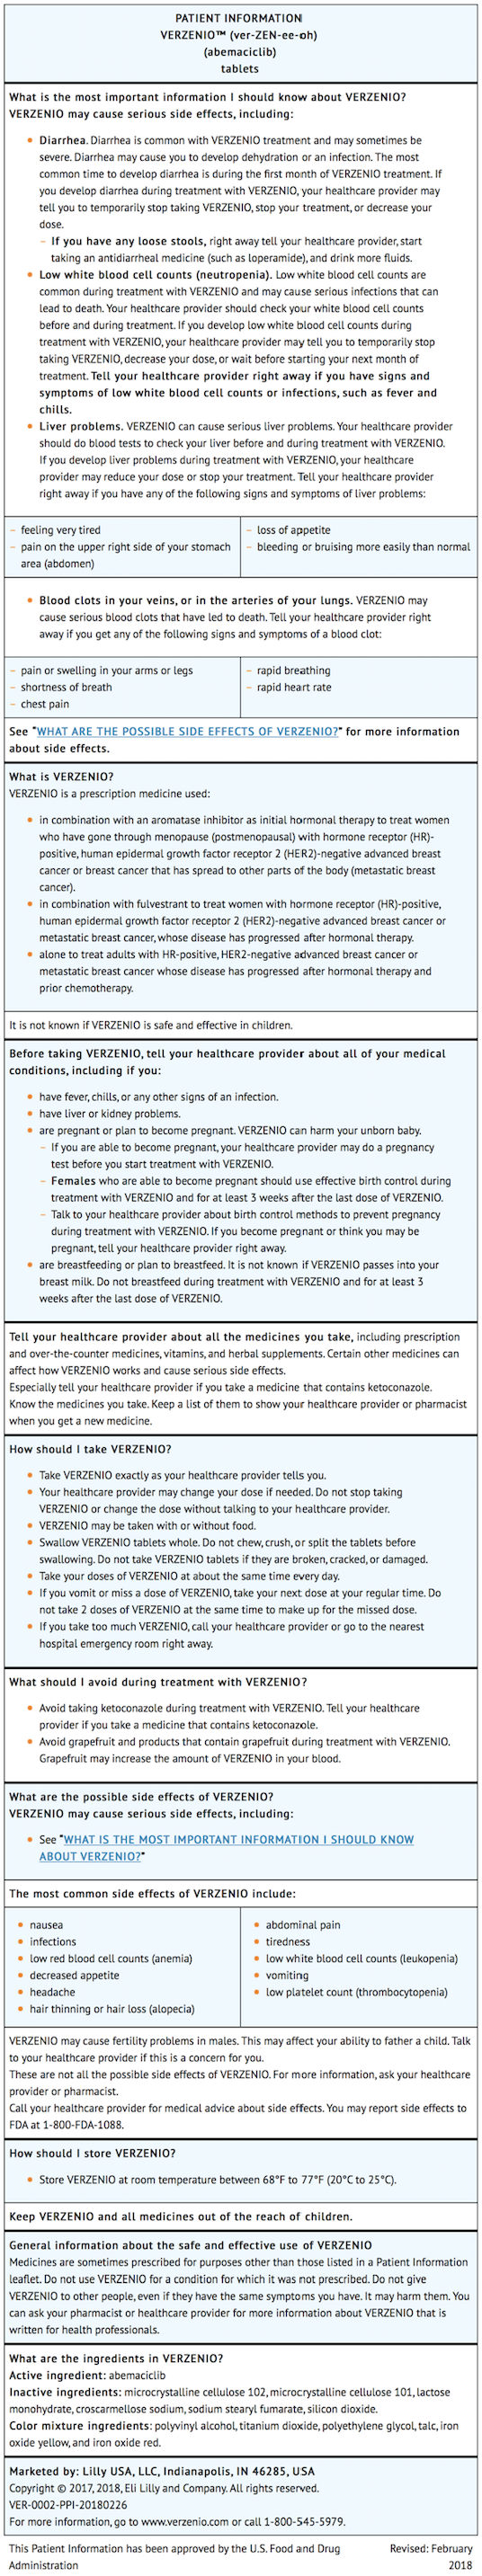 File:Abemaciclib Patient Counseling Info.png